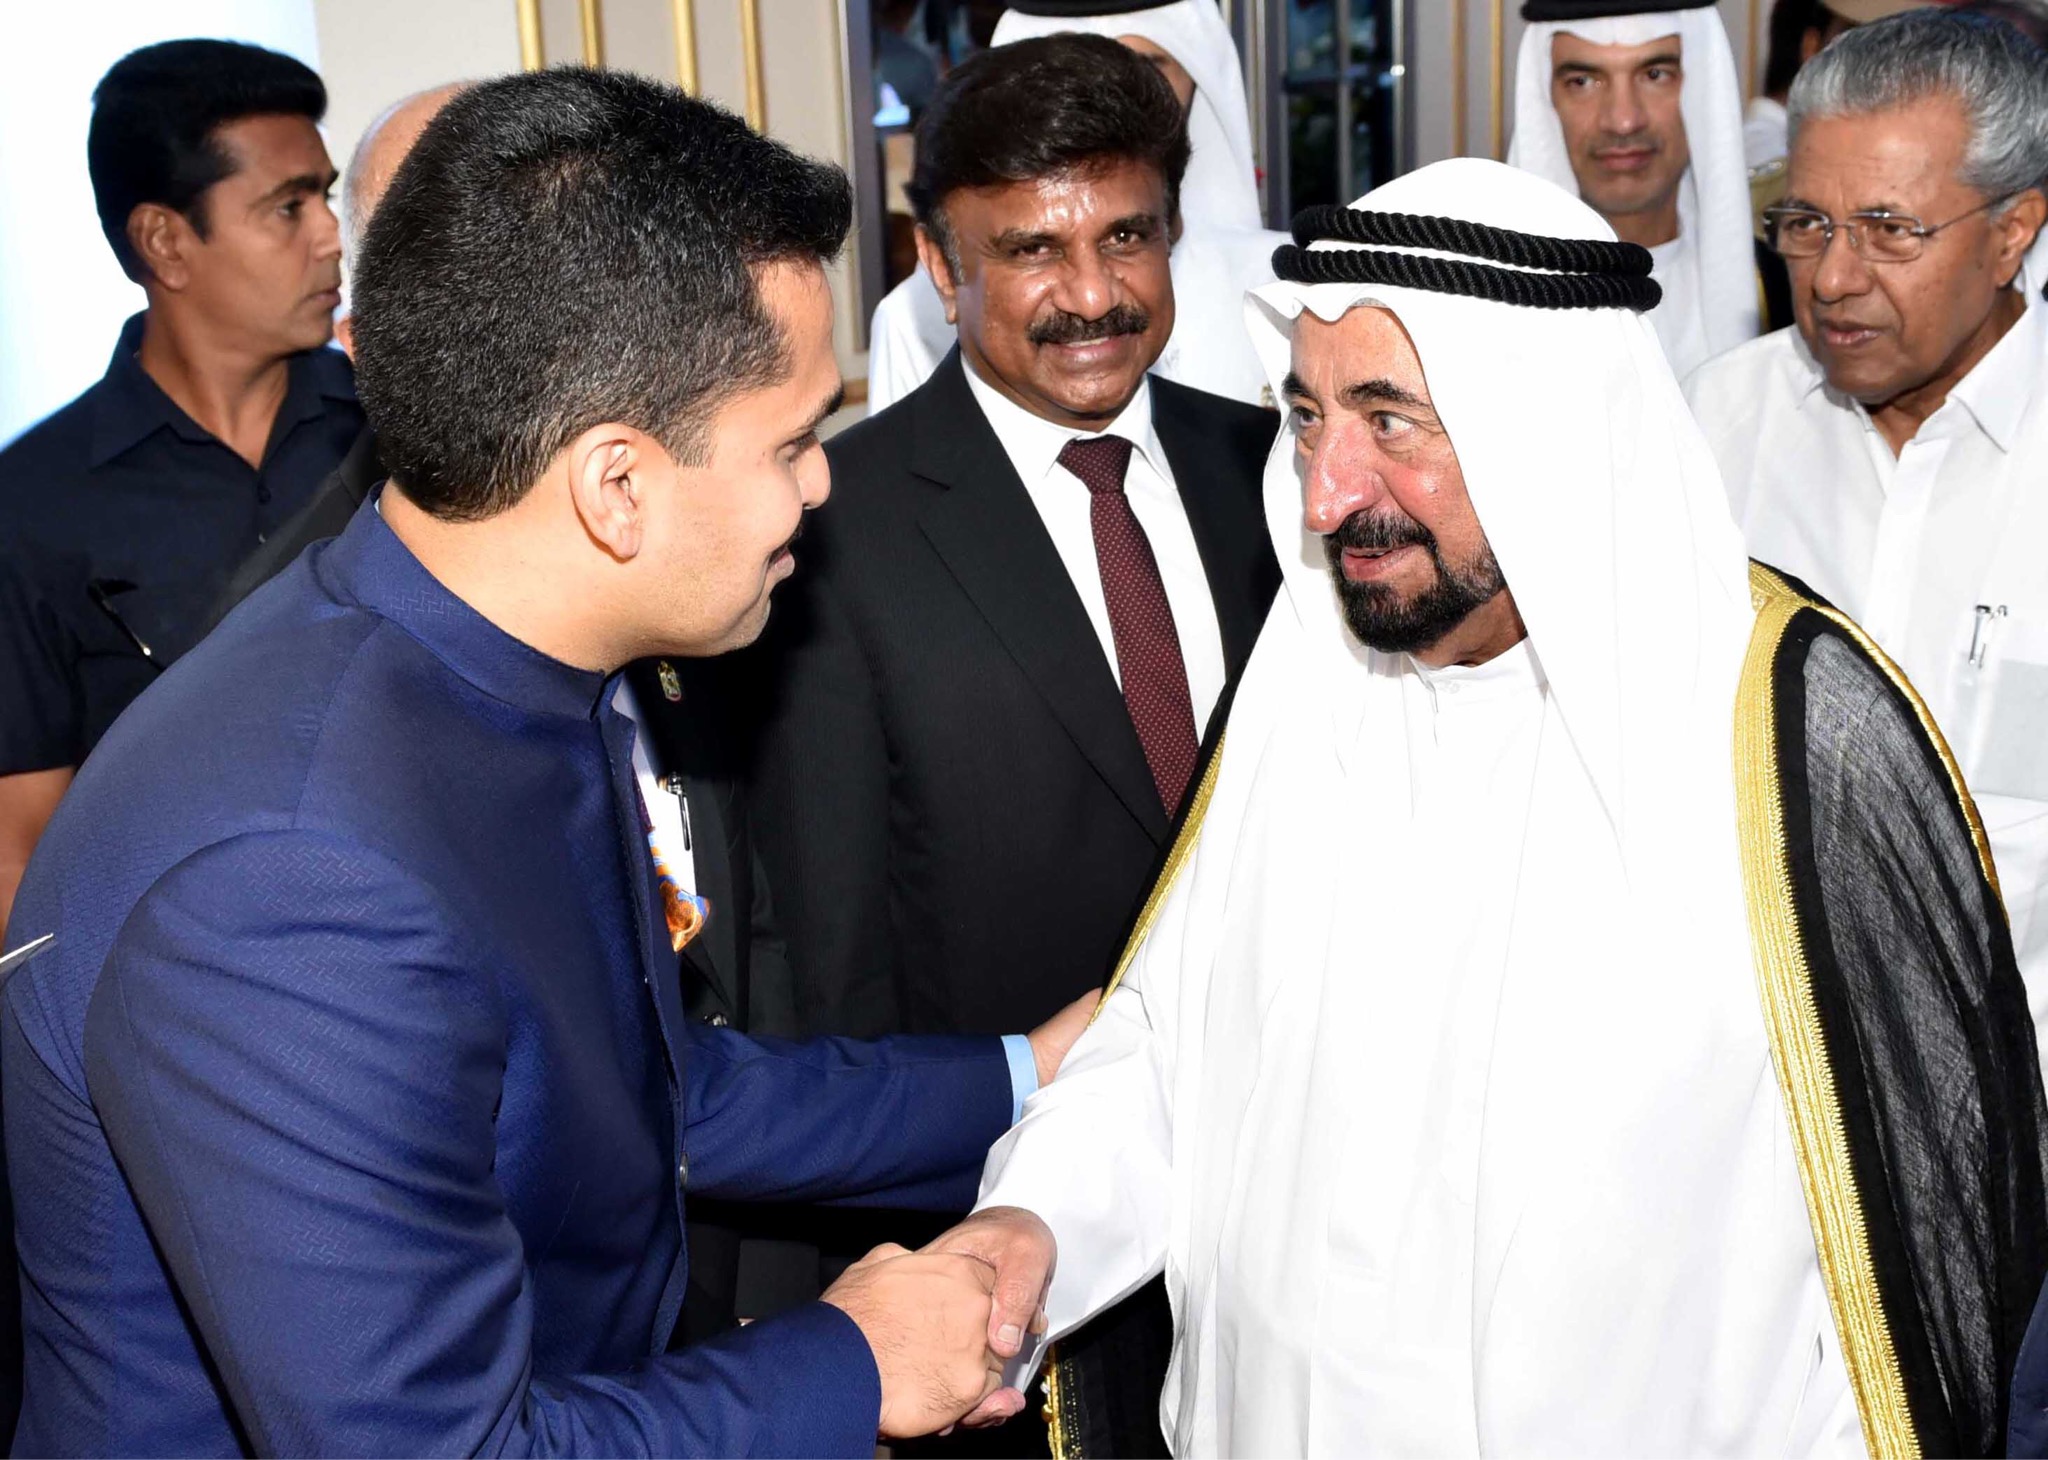 With H.H. Sheikh Dr. Sultan bin Muhammad Al Qasimi, Supreme Council Member and Ruler of Sharjah